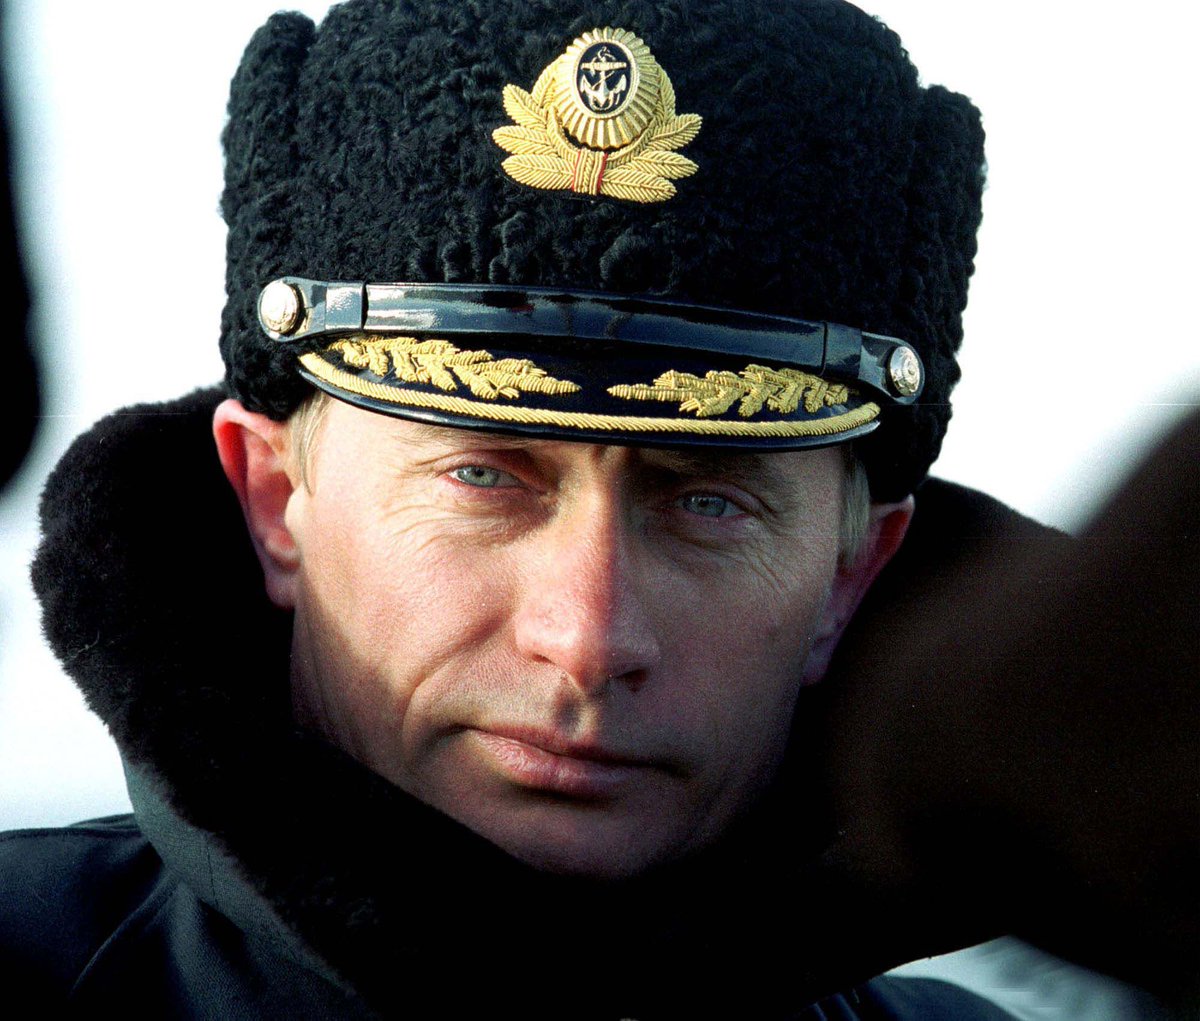 Consolidating control: Even Putin's critics acknowledge he has accomplished three central objectives: building a strong Russian state, re-establishing Russia as a global power and maintaining his own grip on power. https://www.axios.com/vladimir-putin-20-year-anniversary-president-2670dcd5-bd38-46b3-b069-cd61c543a2f9.html?utm_source=twitter&utm_medium=social&utm_campaign=organic&utm_content=1100